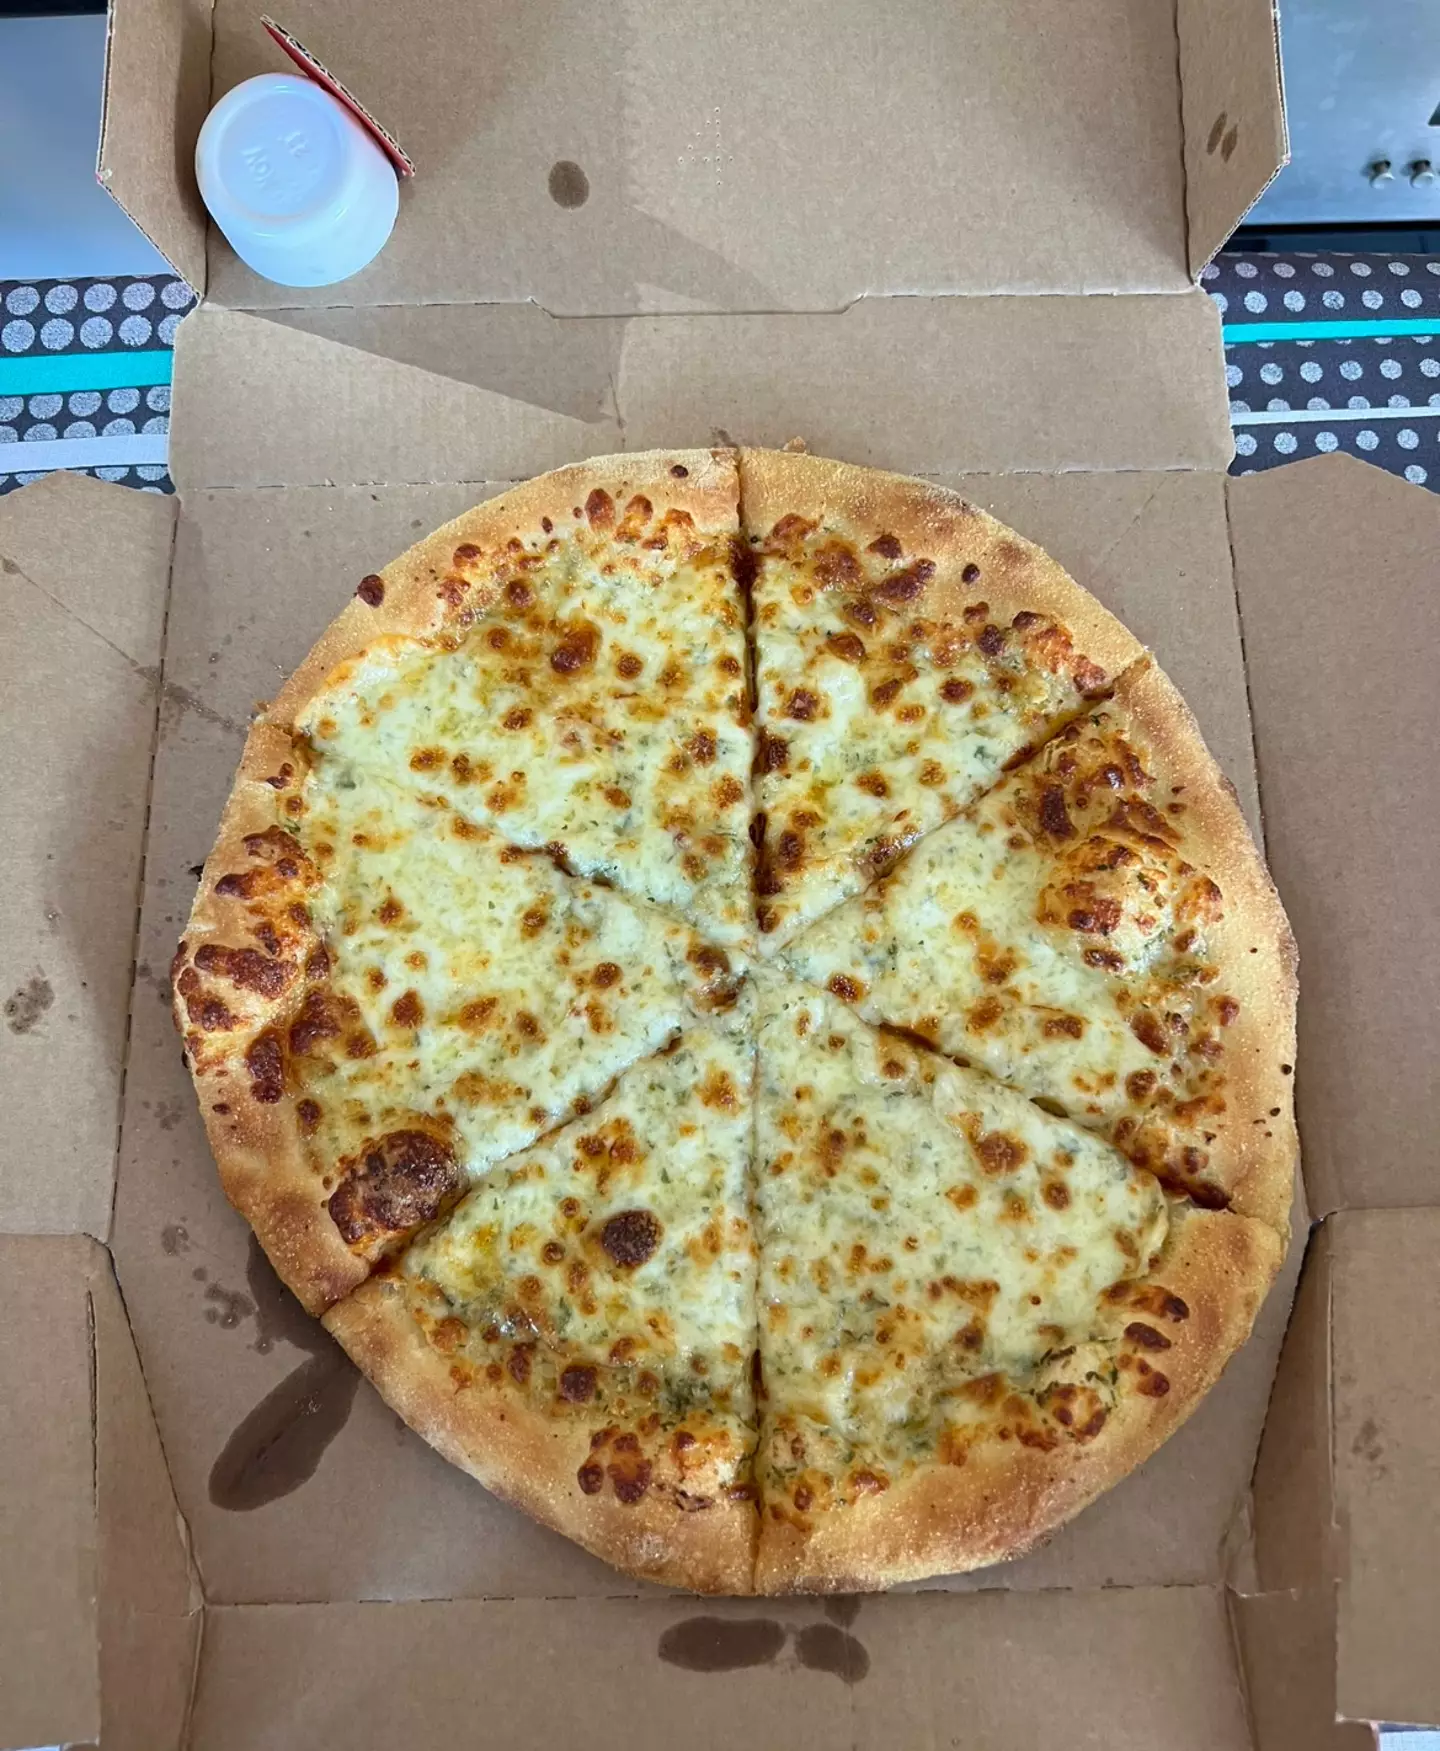 The money-saving pizza hack has gone viral on Twitter